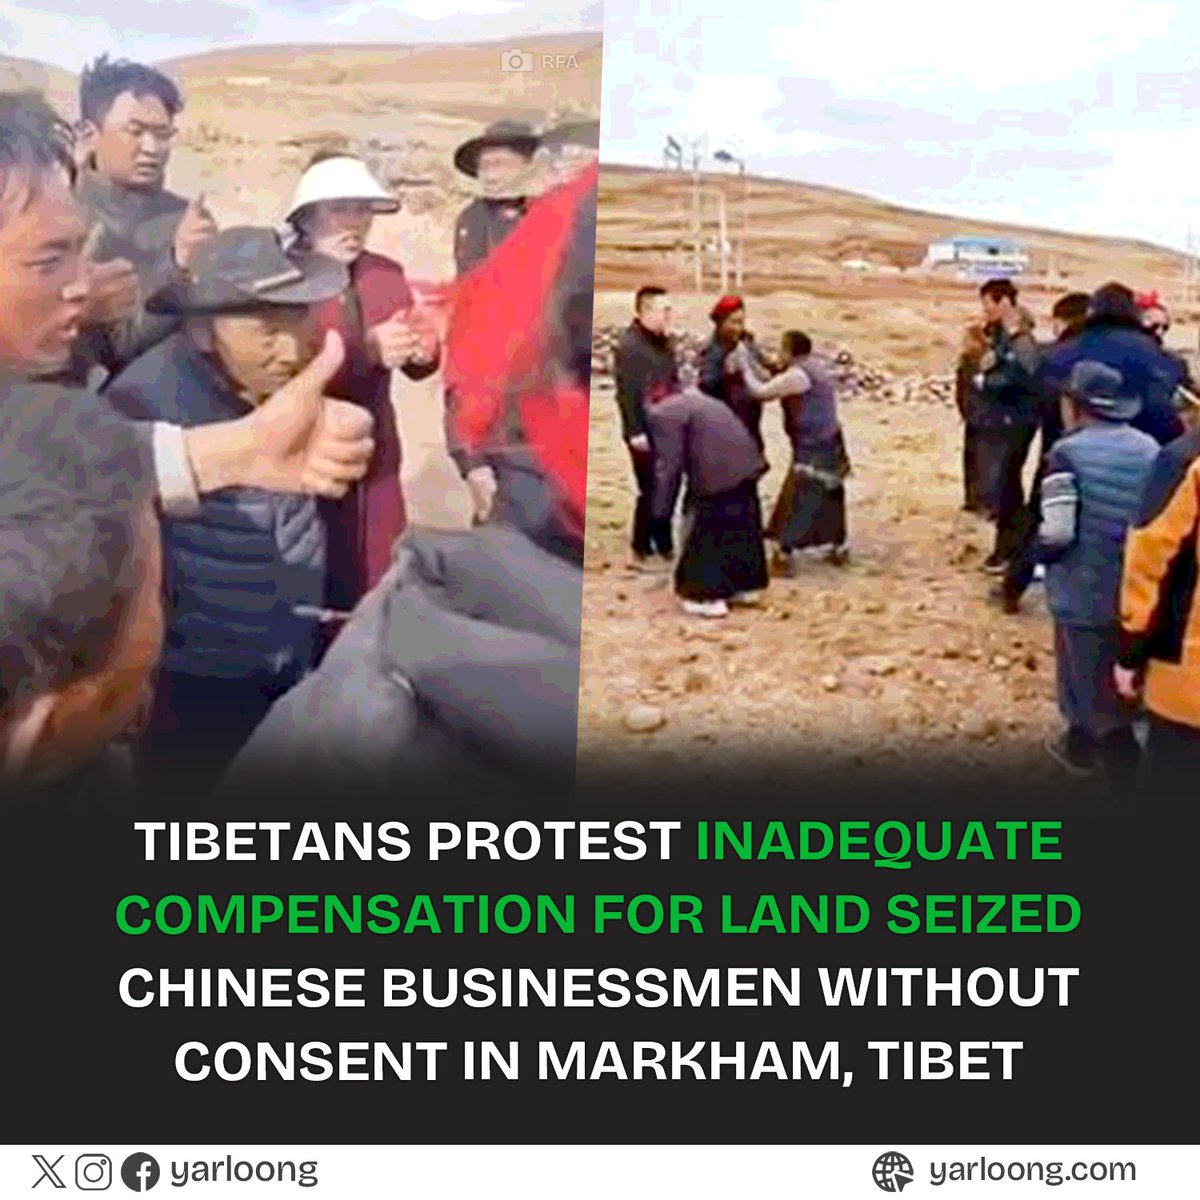 #Tibetan families in Markham, #Tibet, protest inadequate compensation of 3,000 yuan for land sold without their consent, RFA reports. Four detained protesters were released but reported beatings. Police now intensively patrol the area, intensifying surveillance.